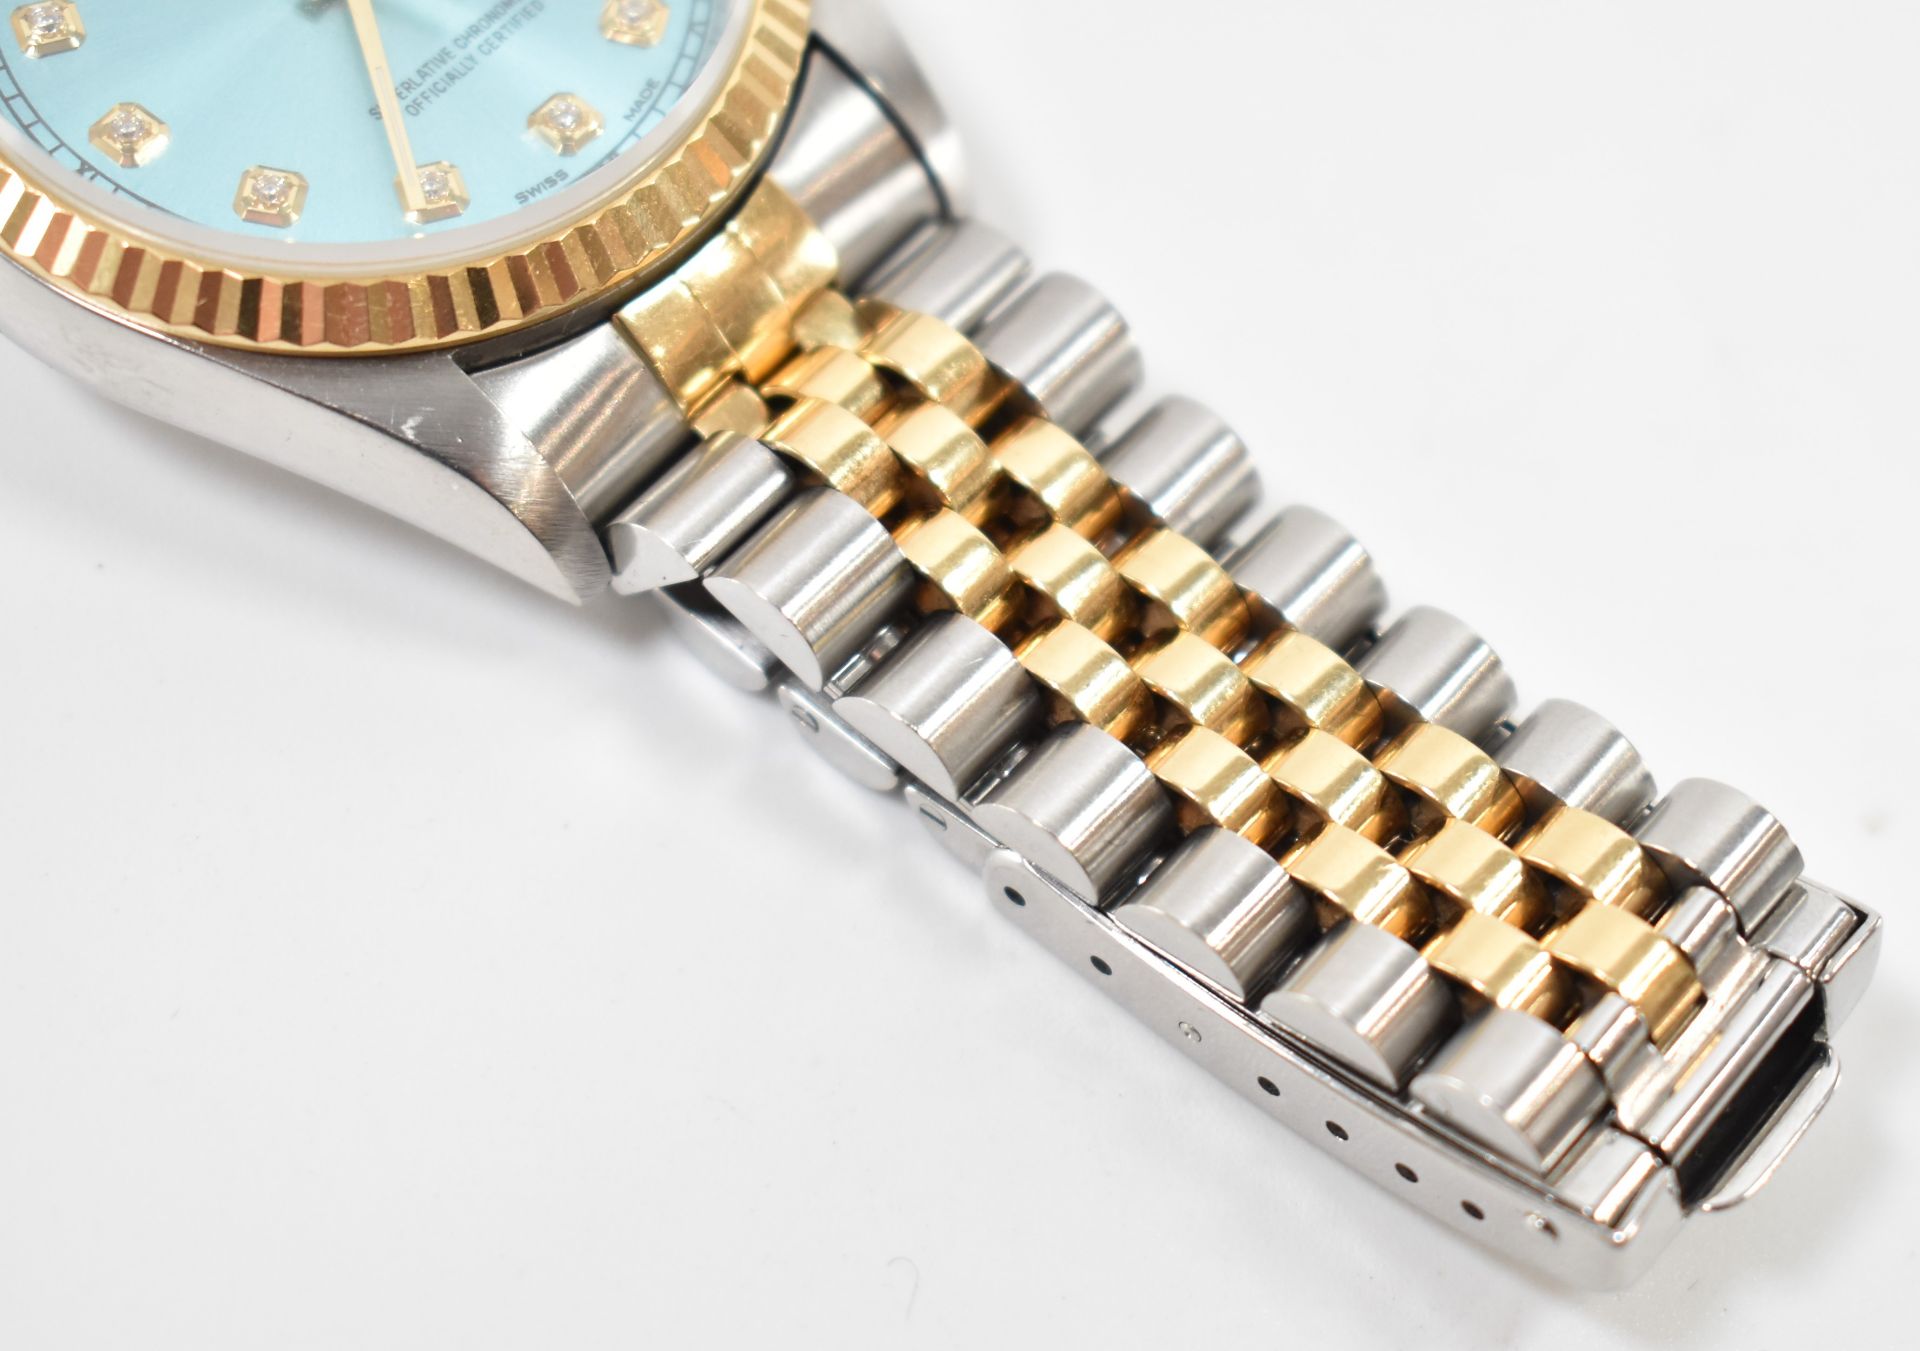 ROLEX OYSTER PERPETUAL SUPERLATIVE CHRONOMETER WRIST WATCH - Image 6 of 6